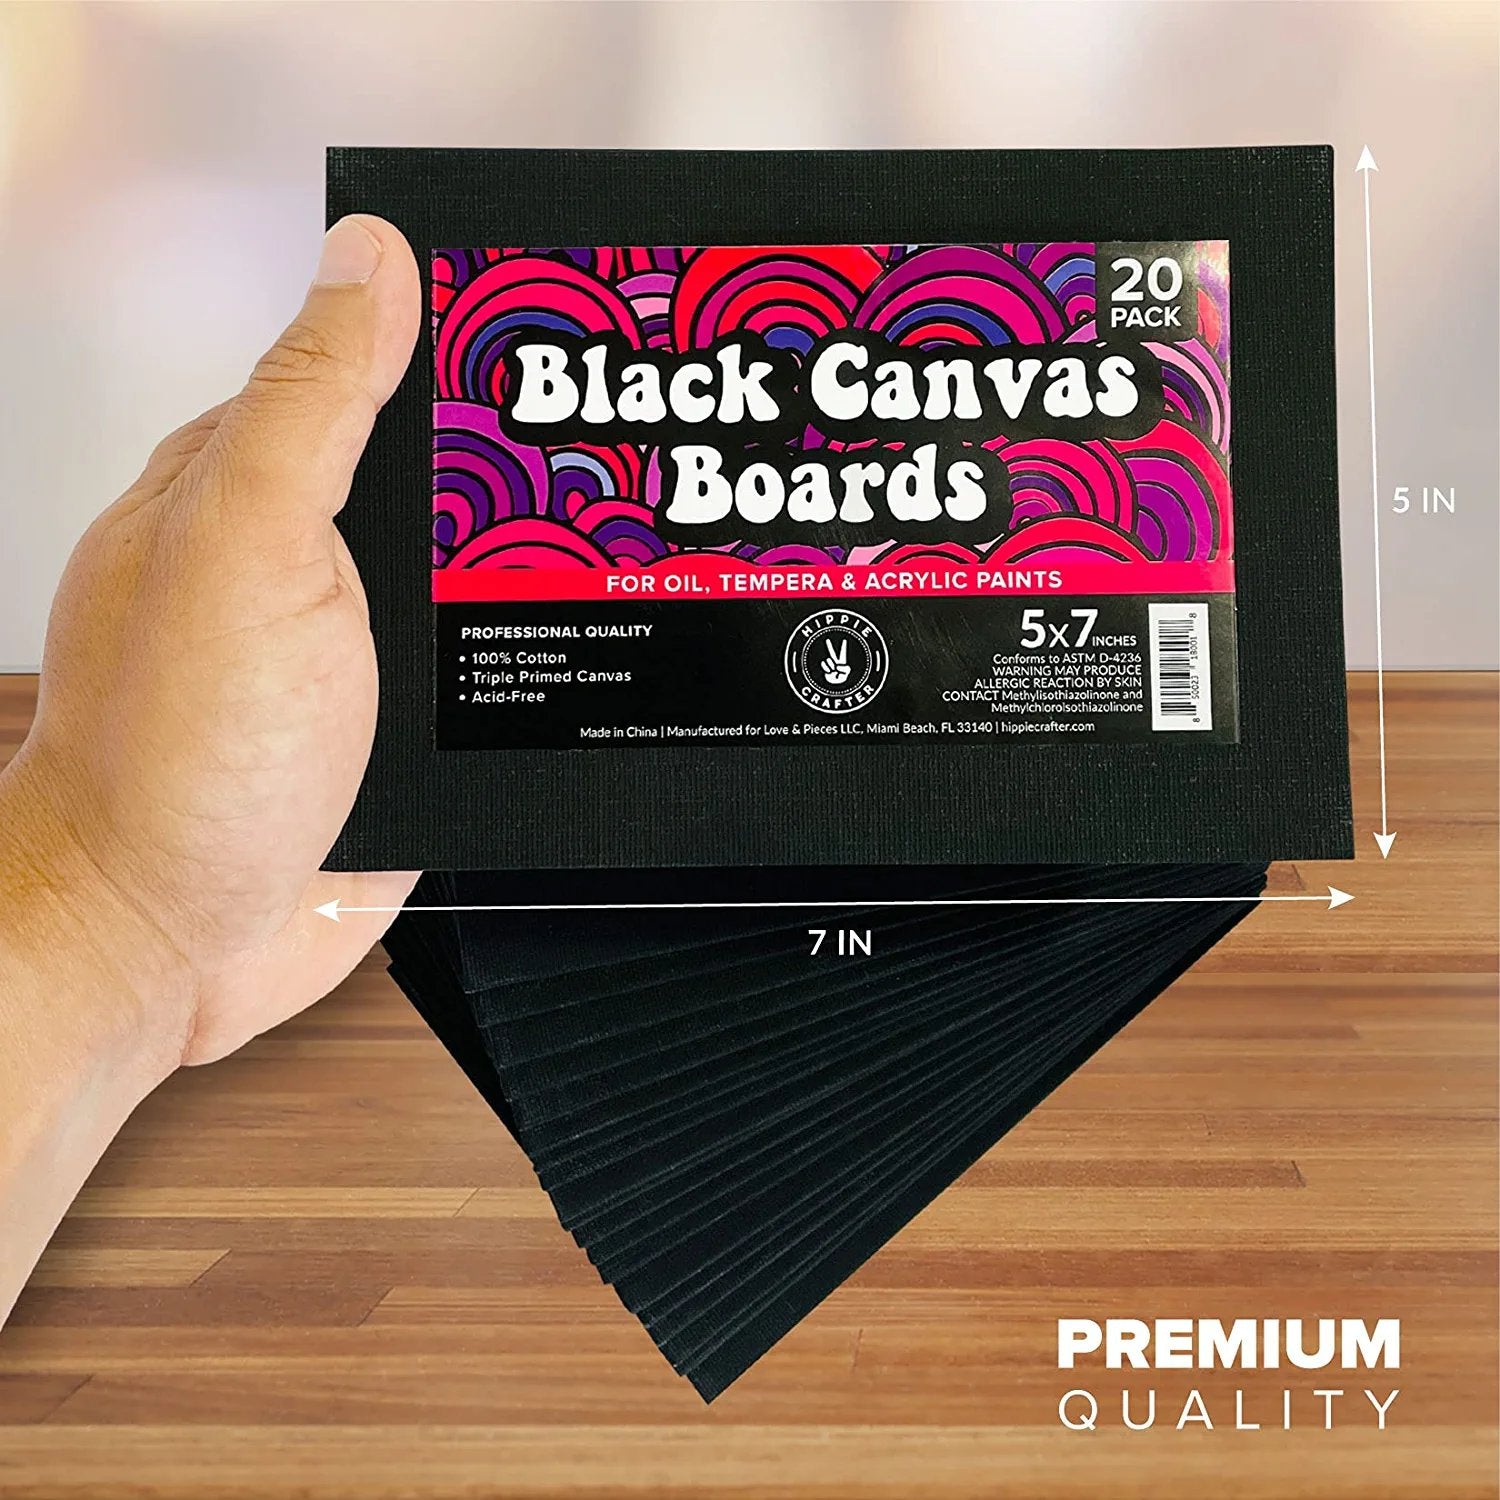 Black Canvas for Painting Bulk 20 Pack Small Canvases for Painting Boards Blank Canvas for Painting 5x7 Art Canvas Panels for Paint for Artists Gesso Primed for Oil, Acrylic, and Watercolor